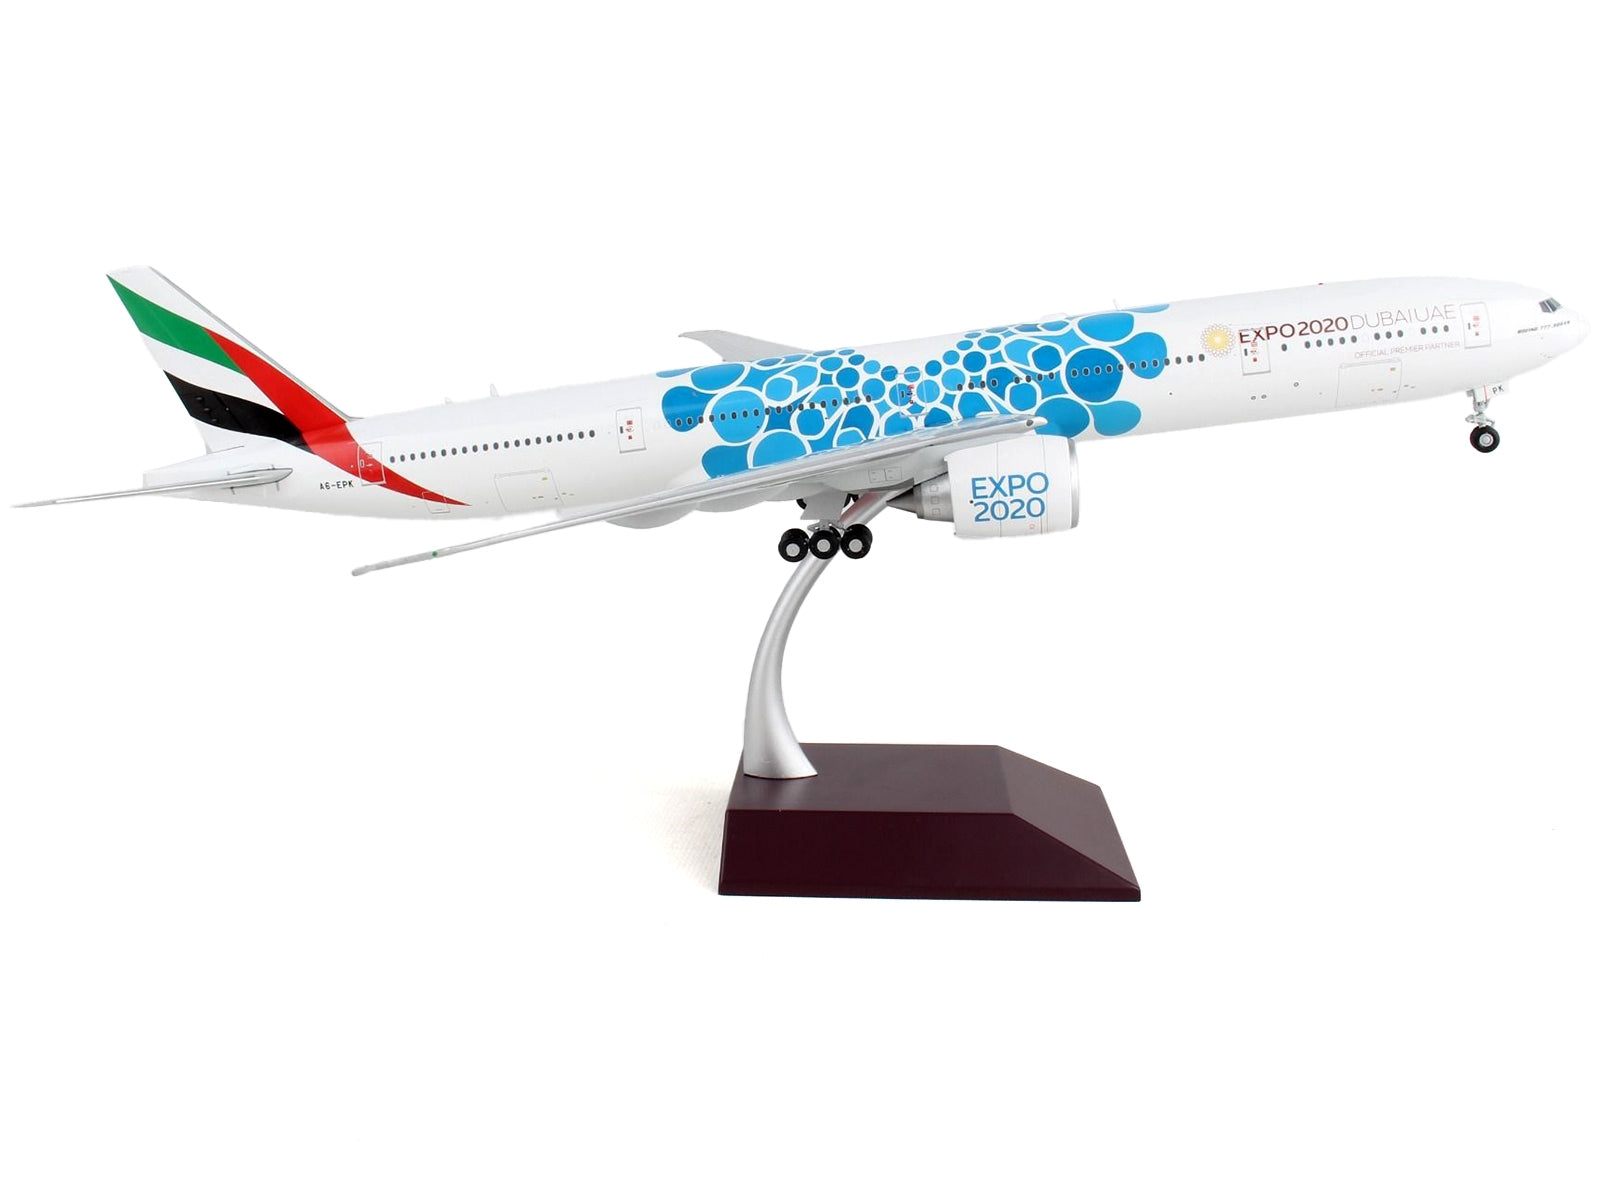 Boeing 777-300ER Commercial Aircraft "Emirates Airlines - Dubai Expo 2020"